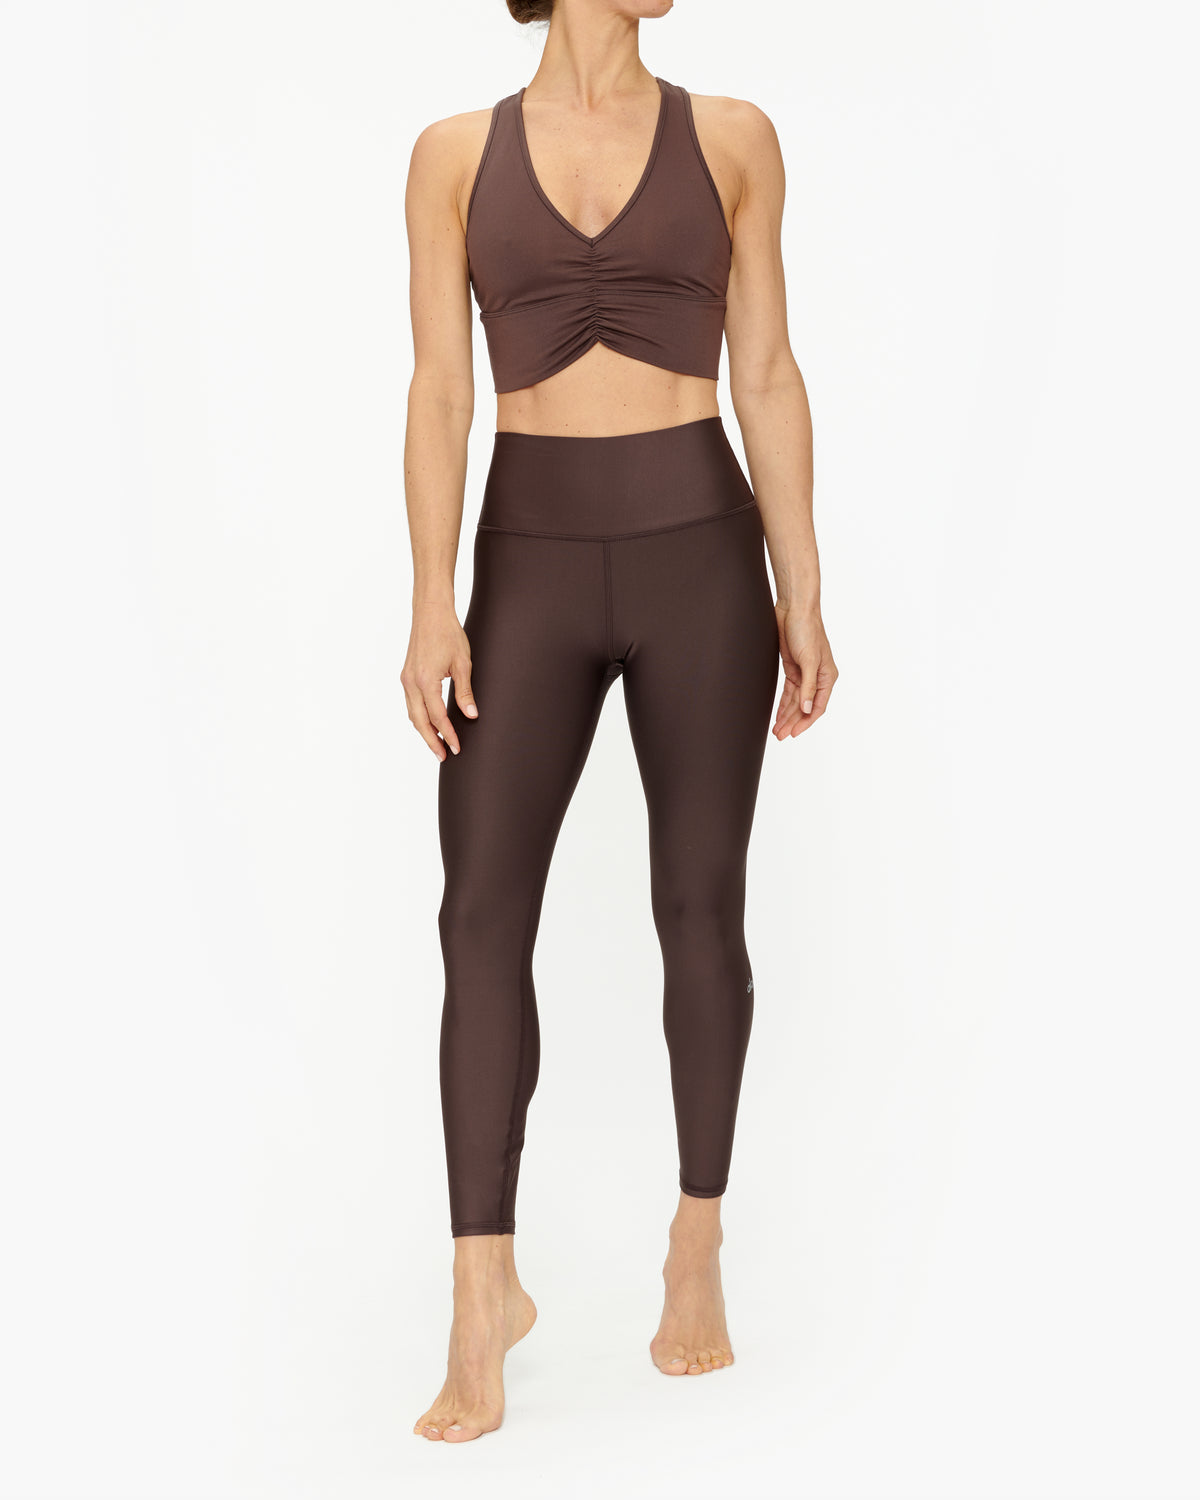 ALO Yoga. Wild Thing Bra in Brown. Size XS.